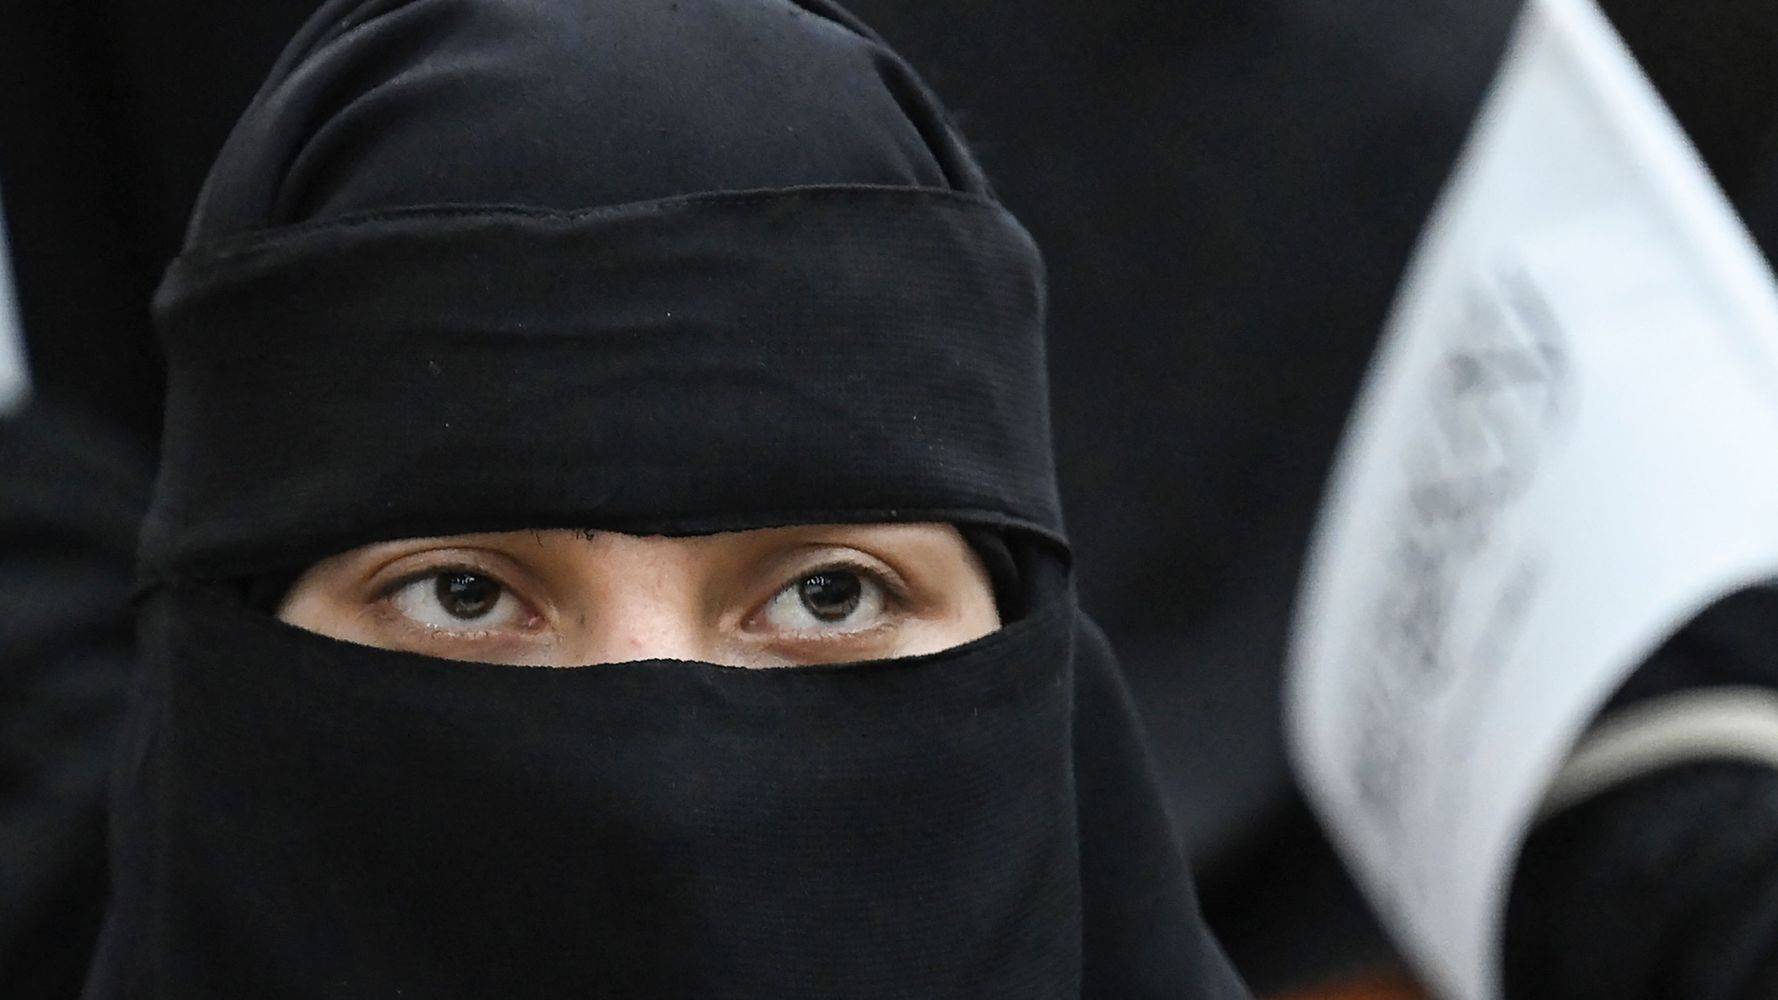 Taliban: Women Can Study In Gender-Segregated Universities With Dress Code